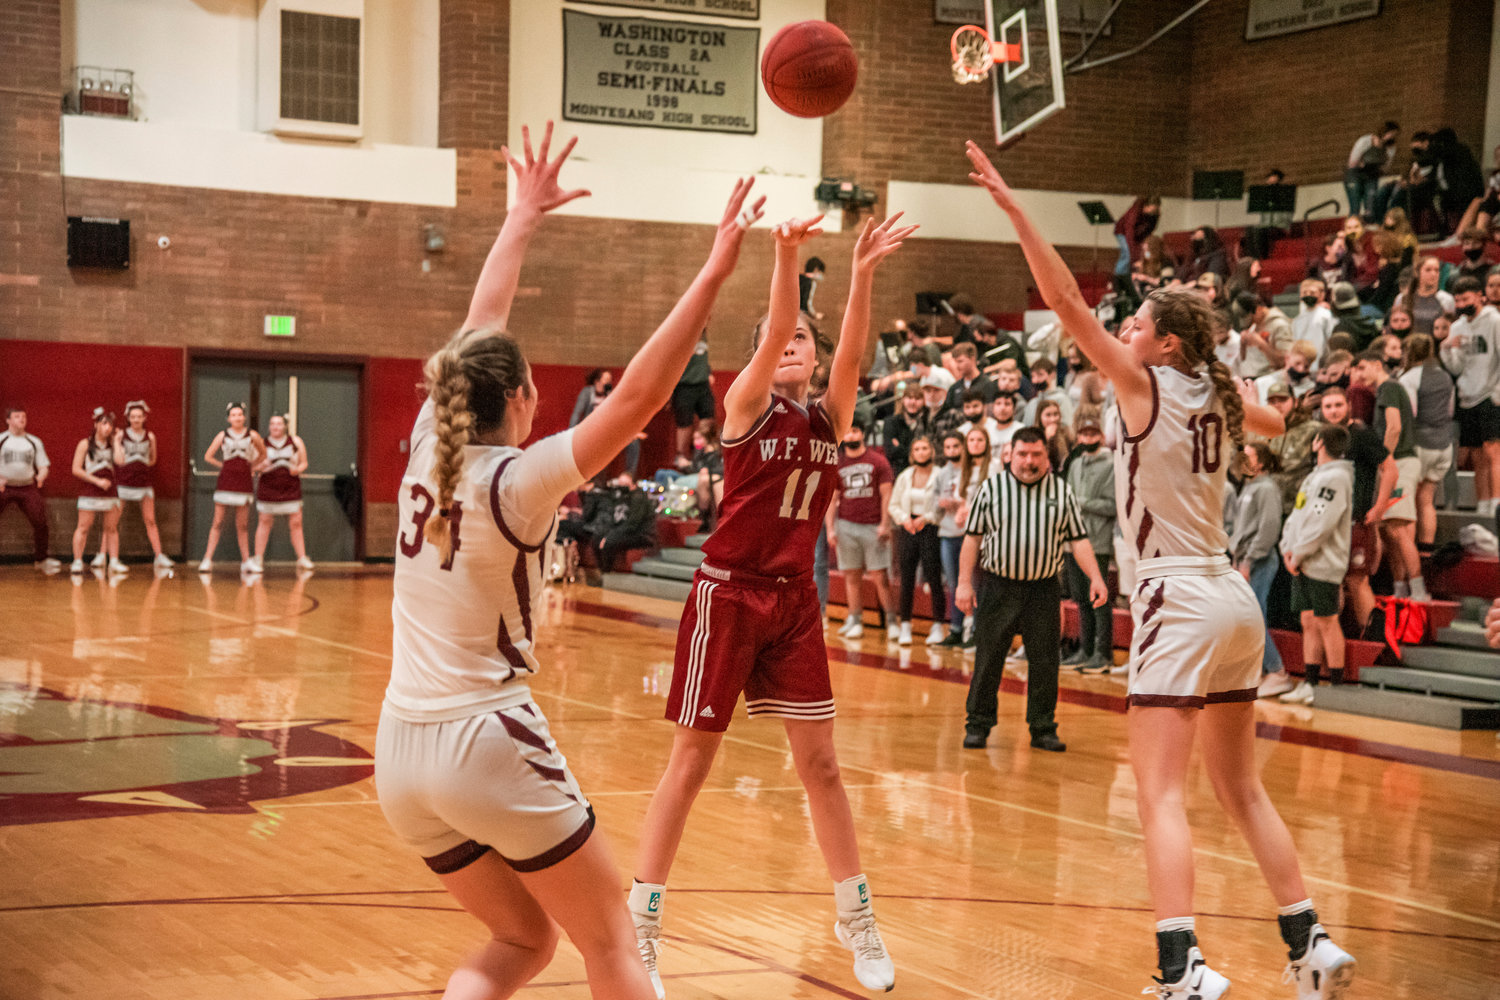 W.F. West’s Olivia Remund (11) puts up a shot during a game against Montesano Tuesday night.